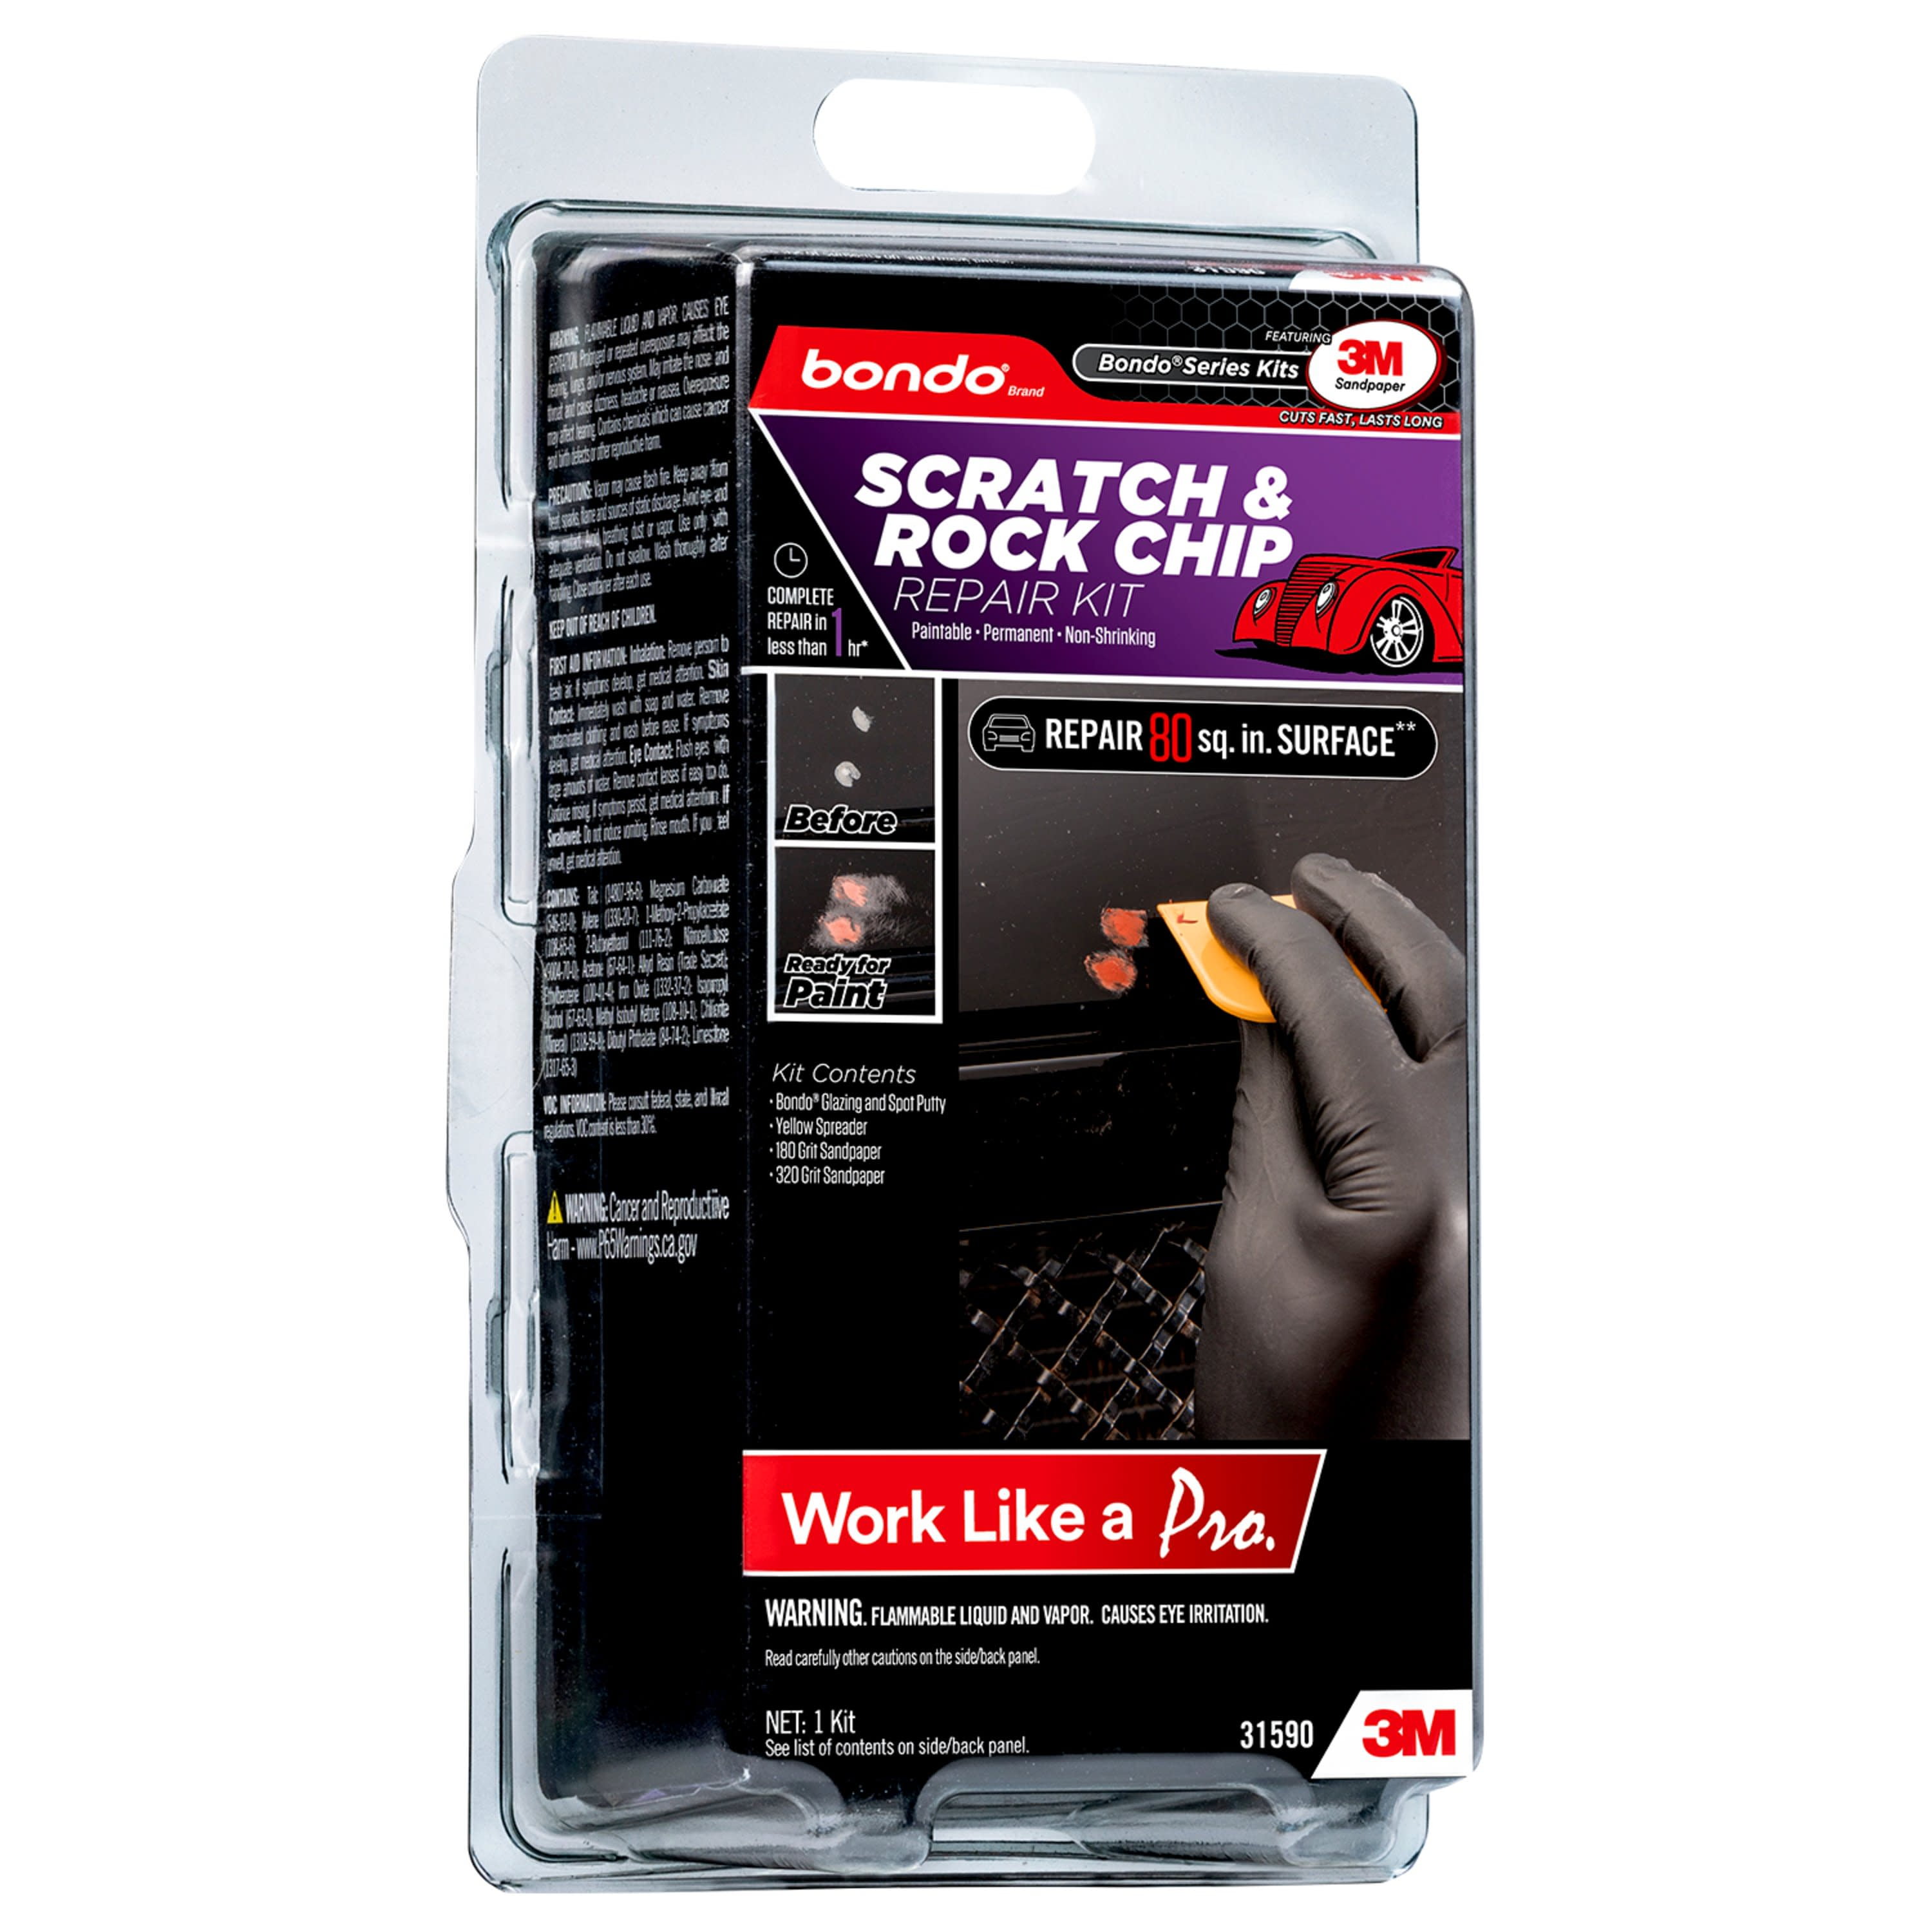 3M Bondo Scratch and Rock Chip Repair Kit, Repairs Autobody Damage, 2 Grits Included